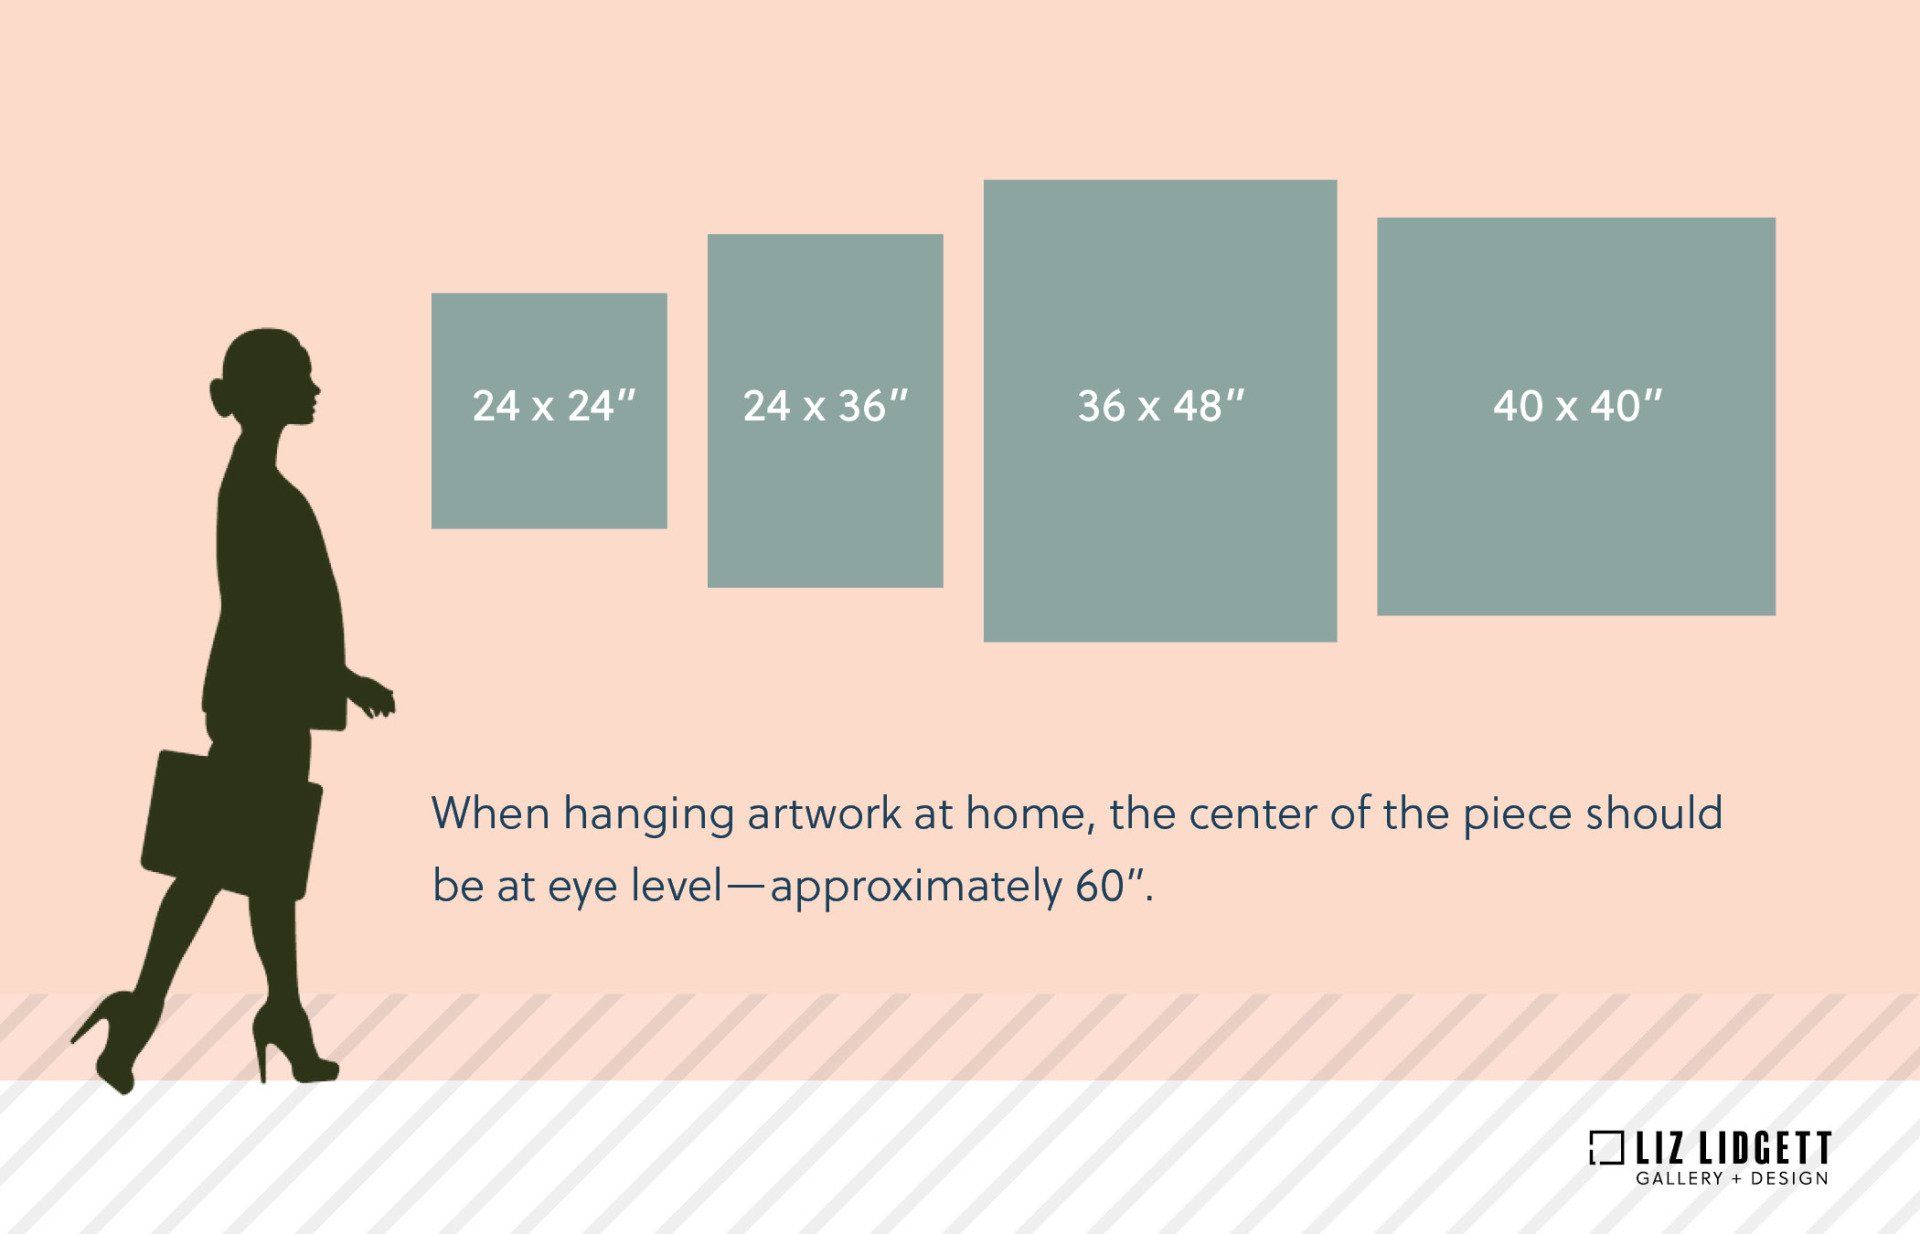 When hanging artwork, the center should be at eye level—approximately 60